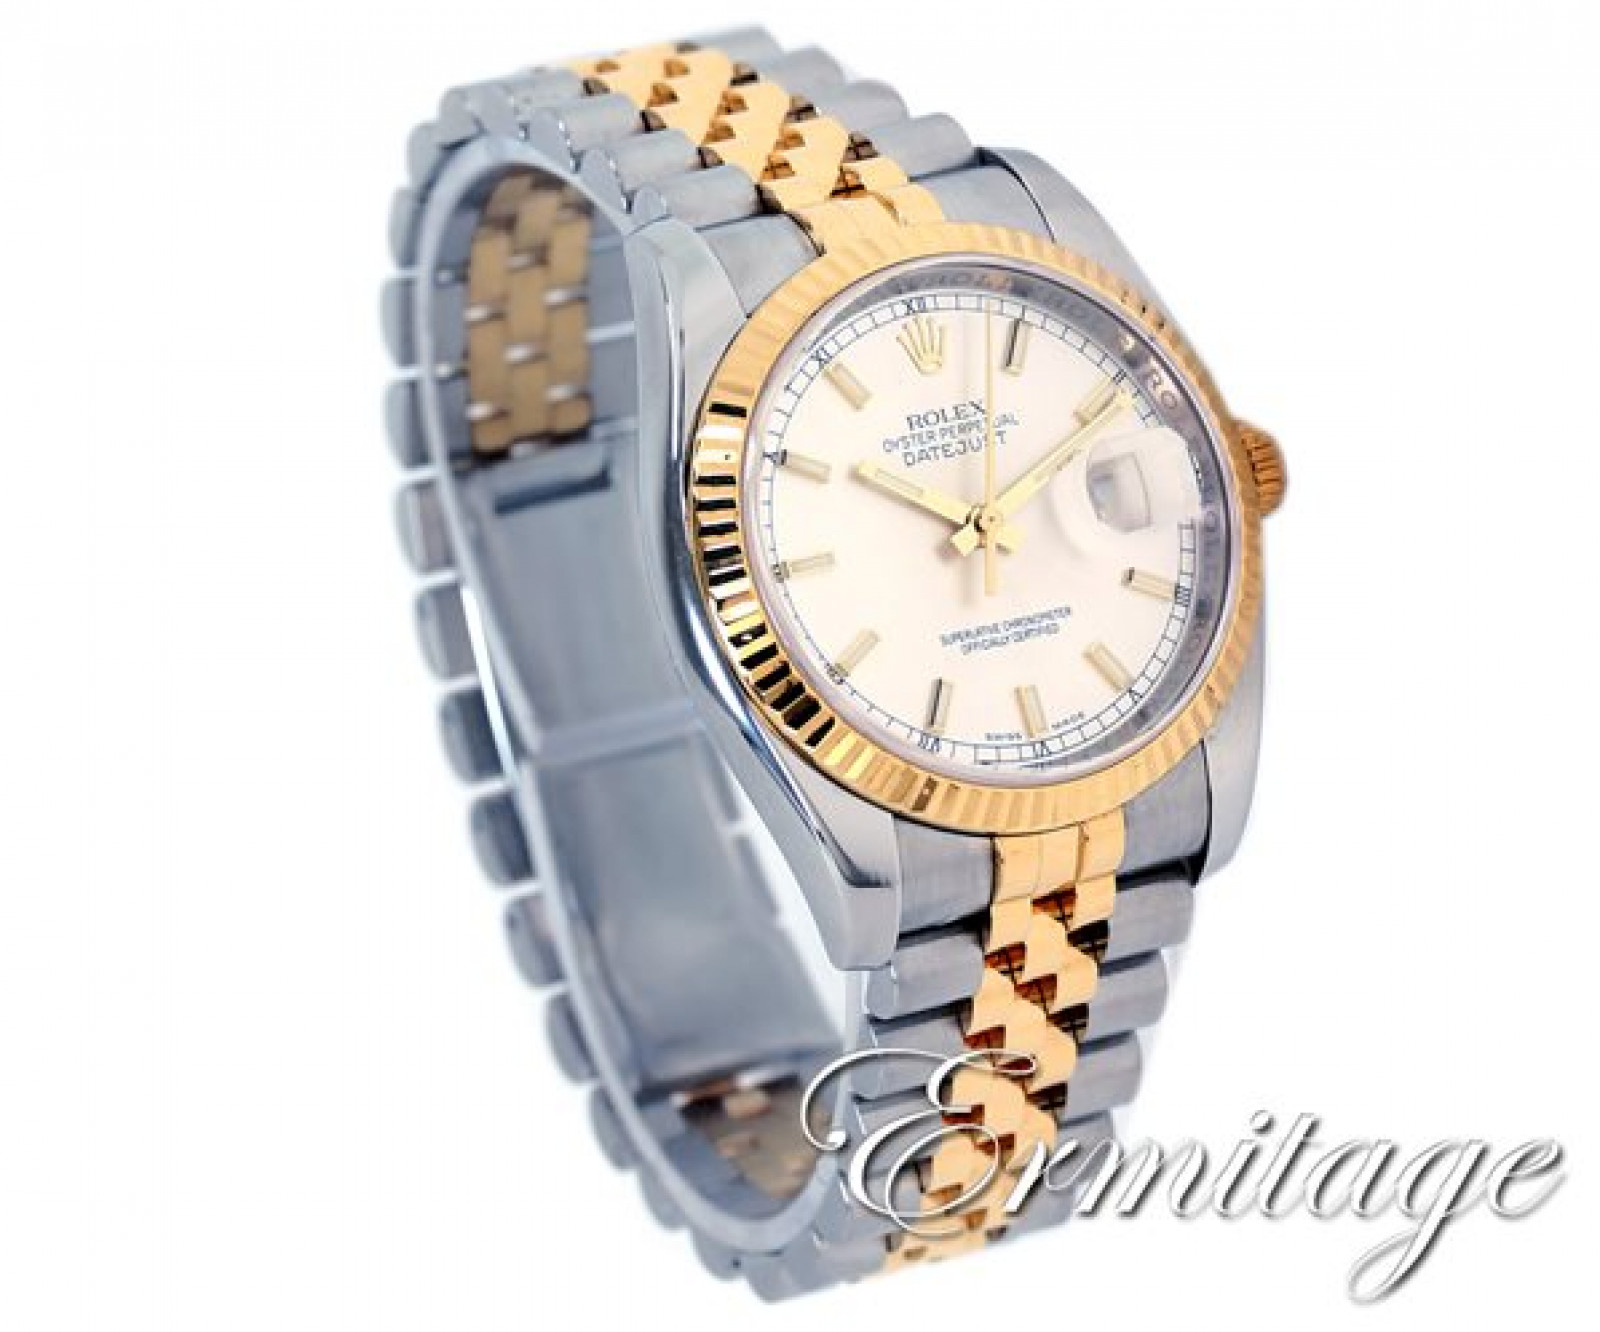 Rolex Oyster Perpetual Datejust 116233 Gold & Steel